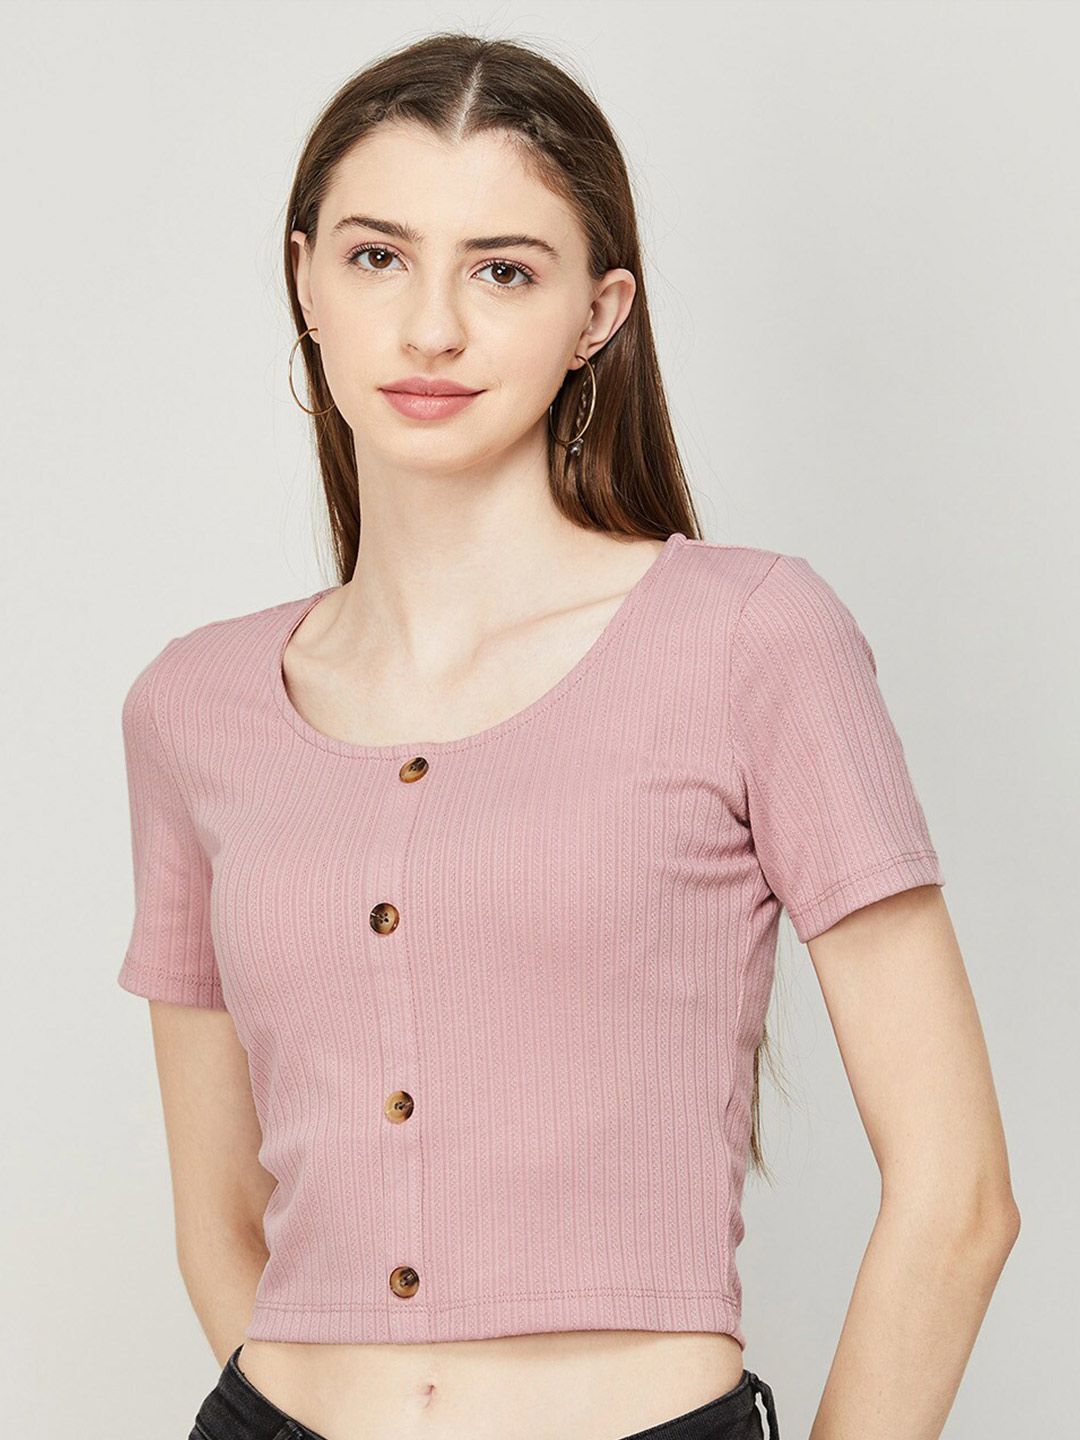 Ginger by Lifestyle Round Neck Crop Top Price in India